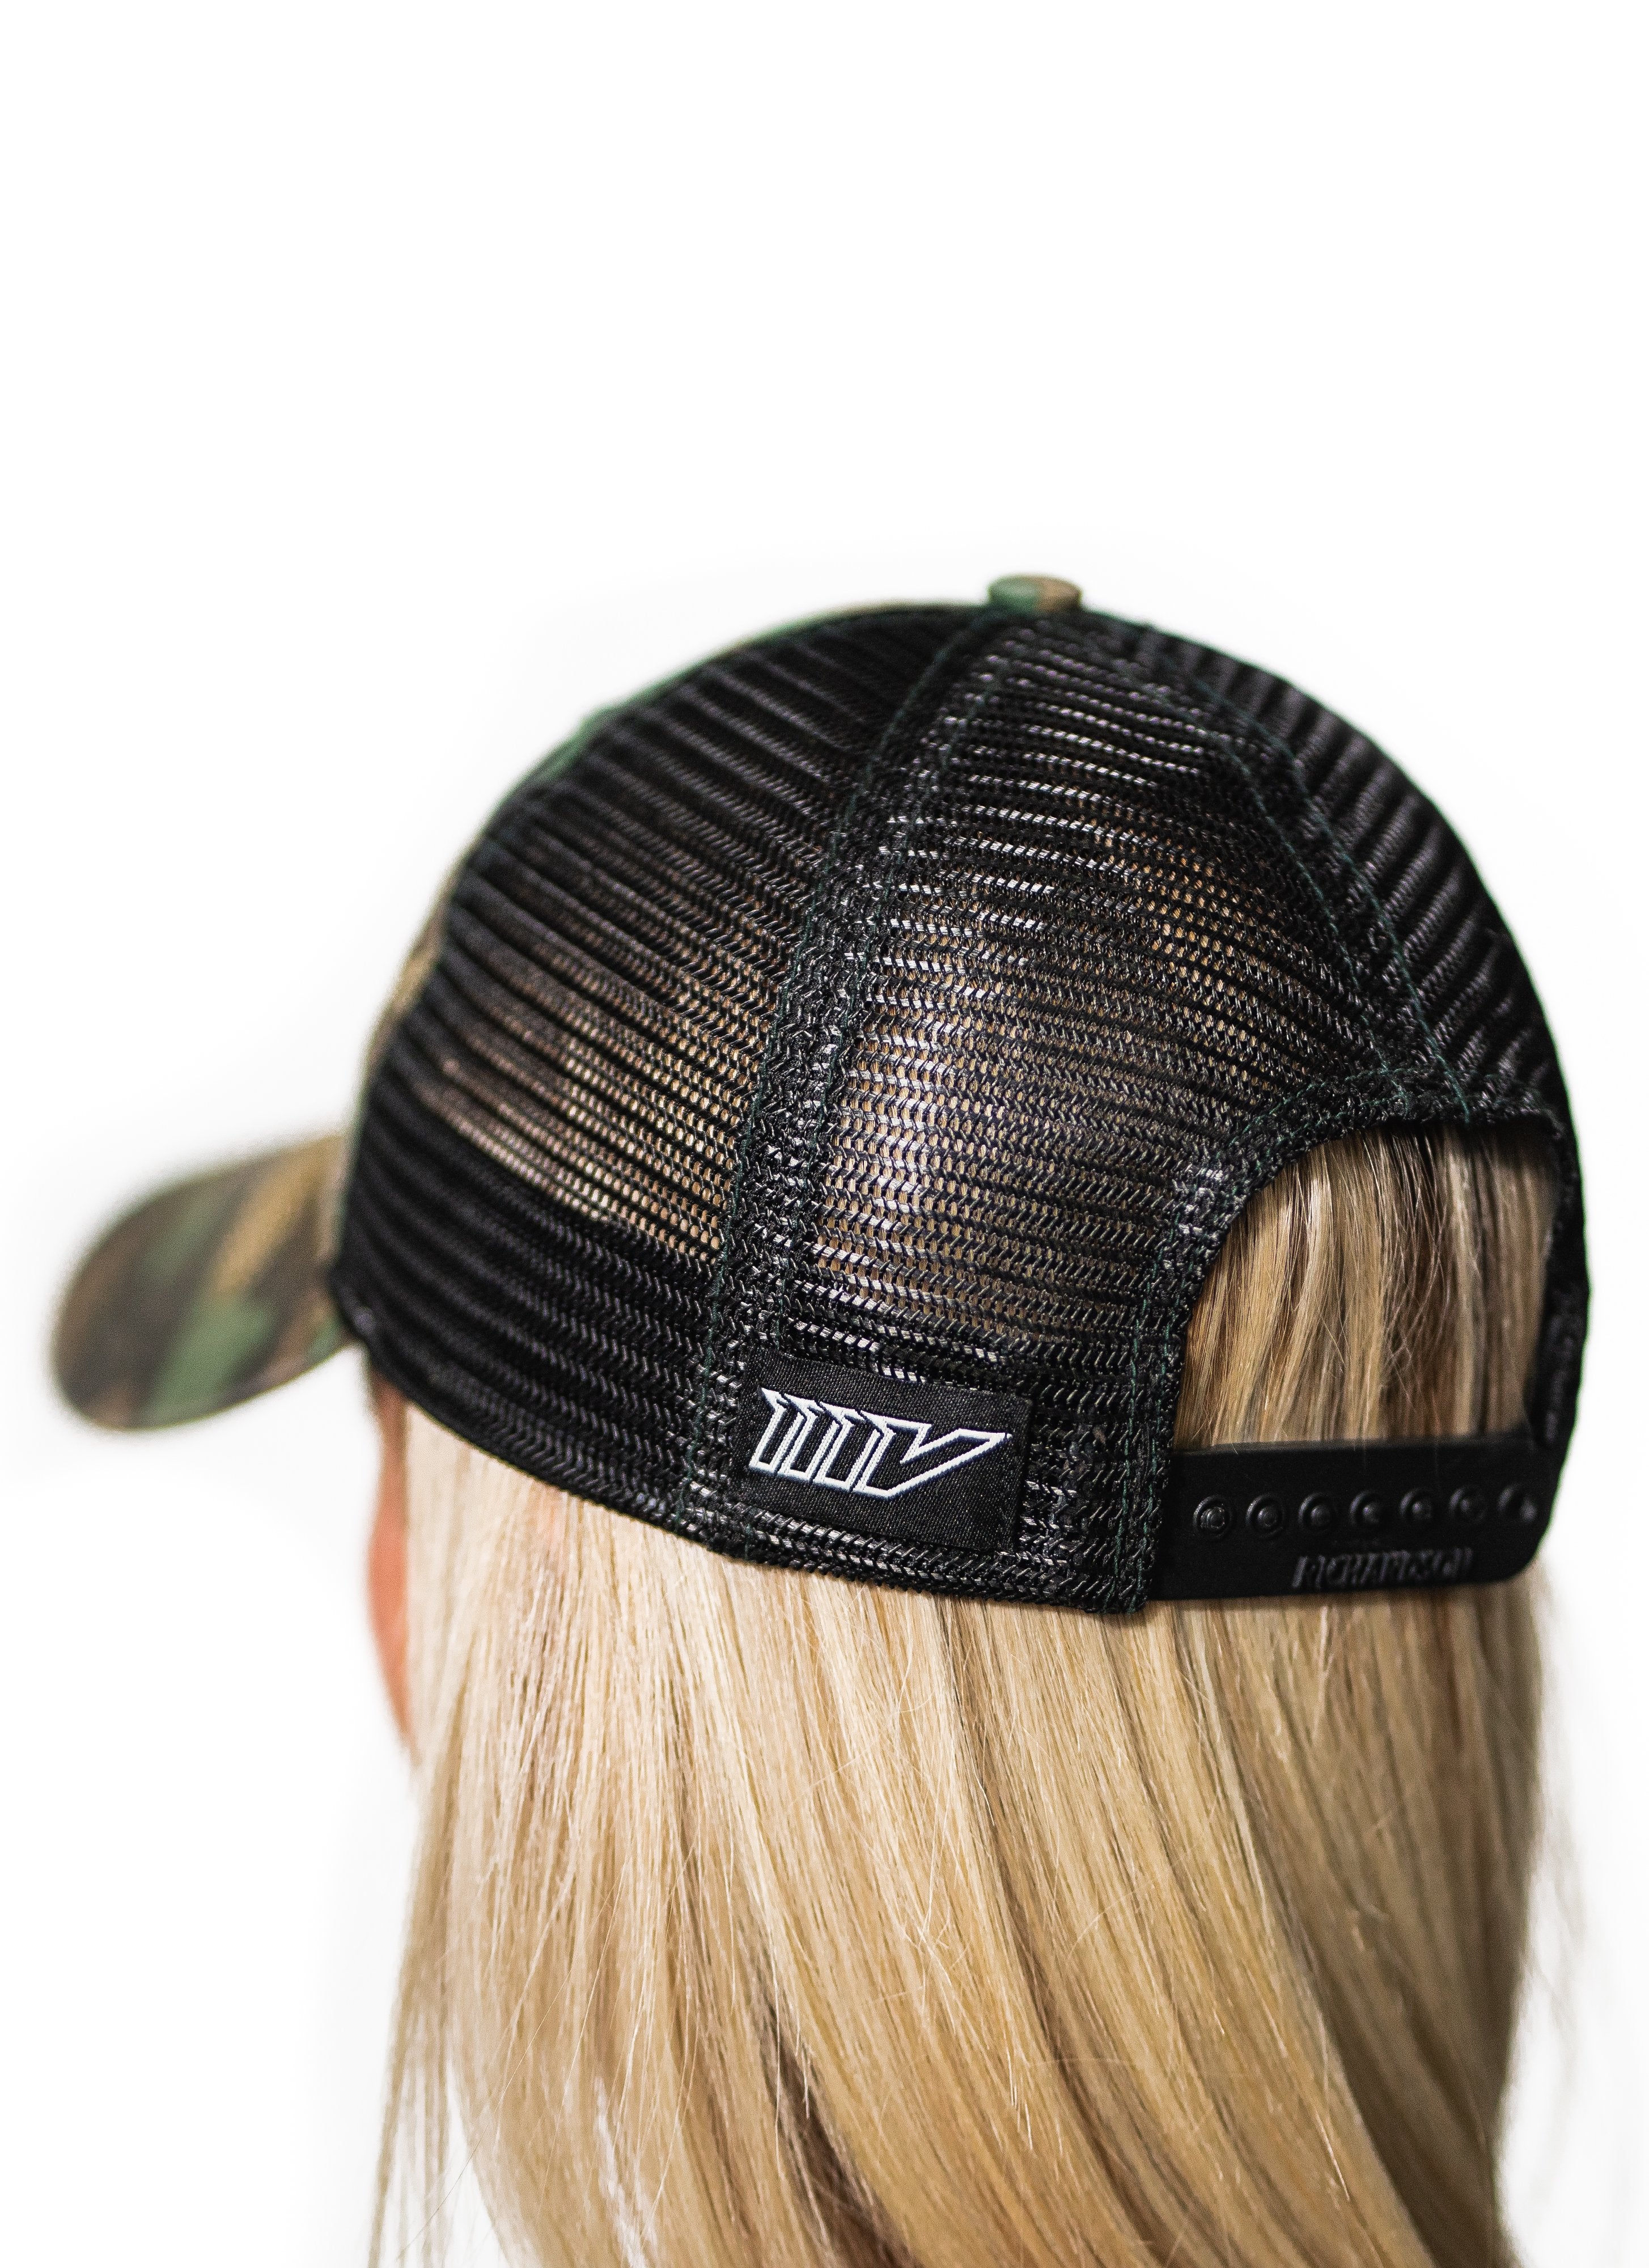 Camo Live Fast Unstructured Snapback